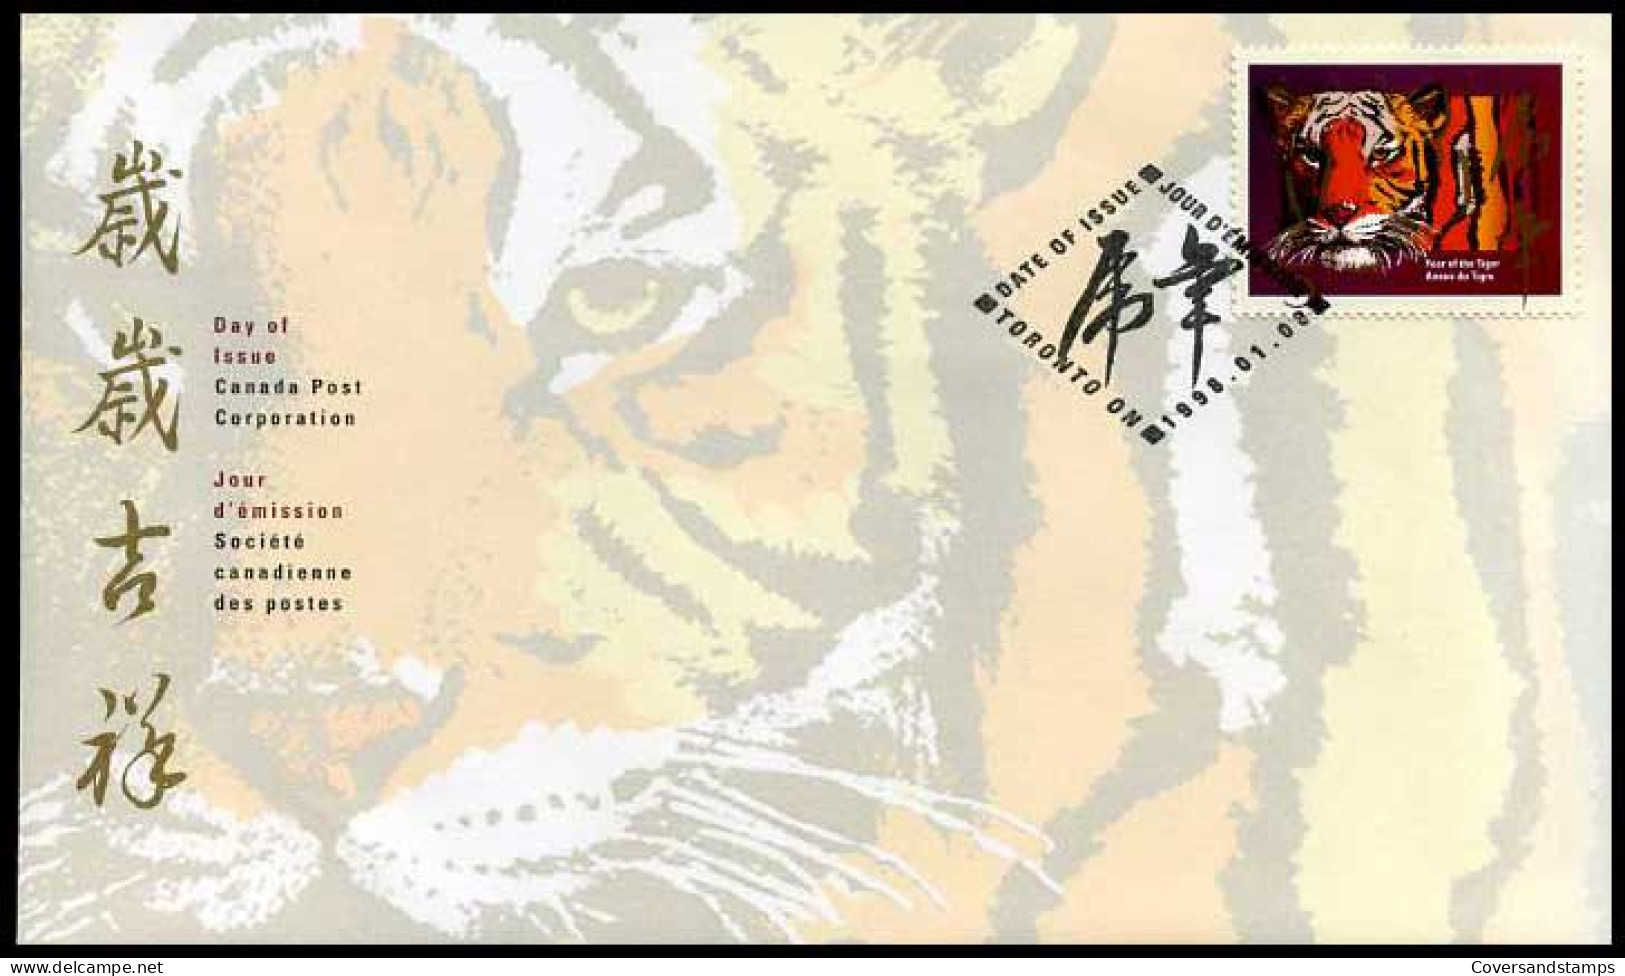 Canada - FDC - Year Of The Tiger                                   - 1991-2000